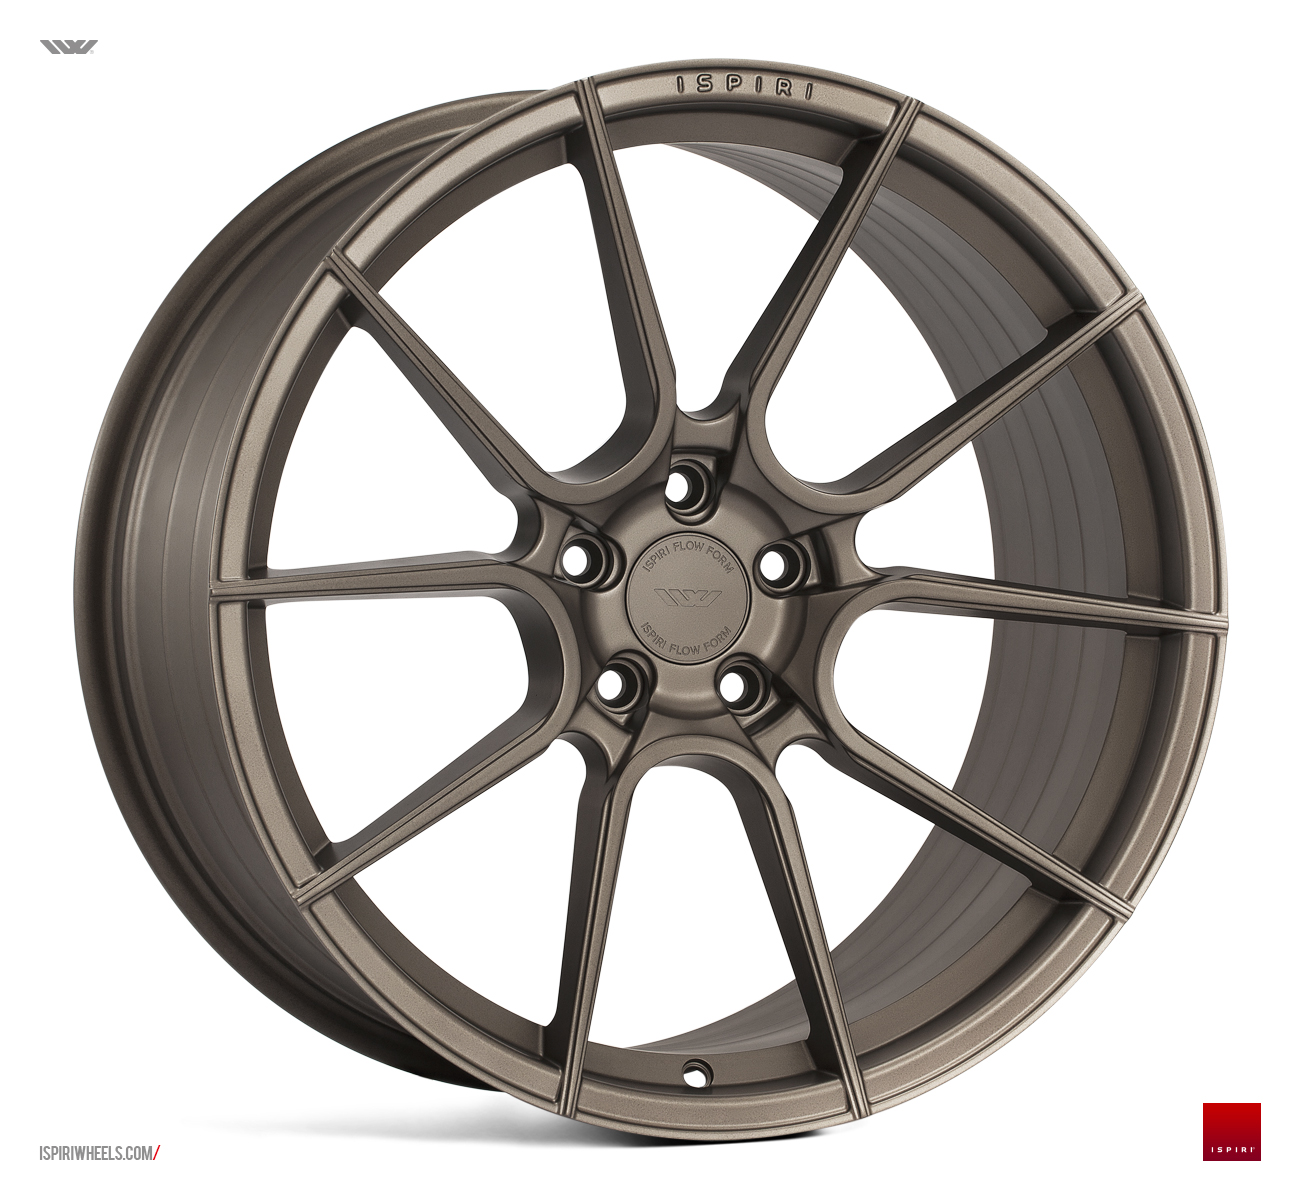 NEW 20  ISPIRI FFR6 TWIN 5 SPOKE ALLOY WHEELS IN MATT CARBON BRONZE  VARIOUS FITMENTS AVAILABLE